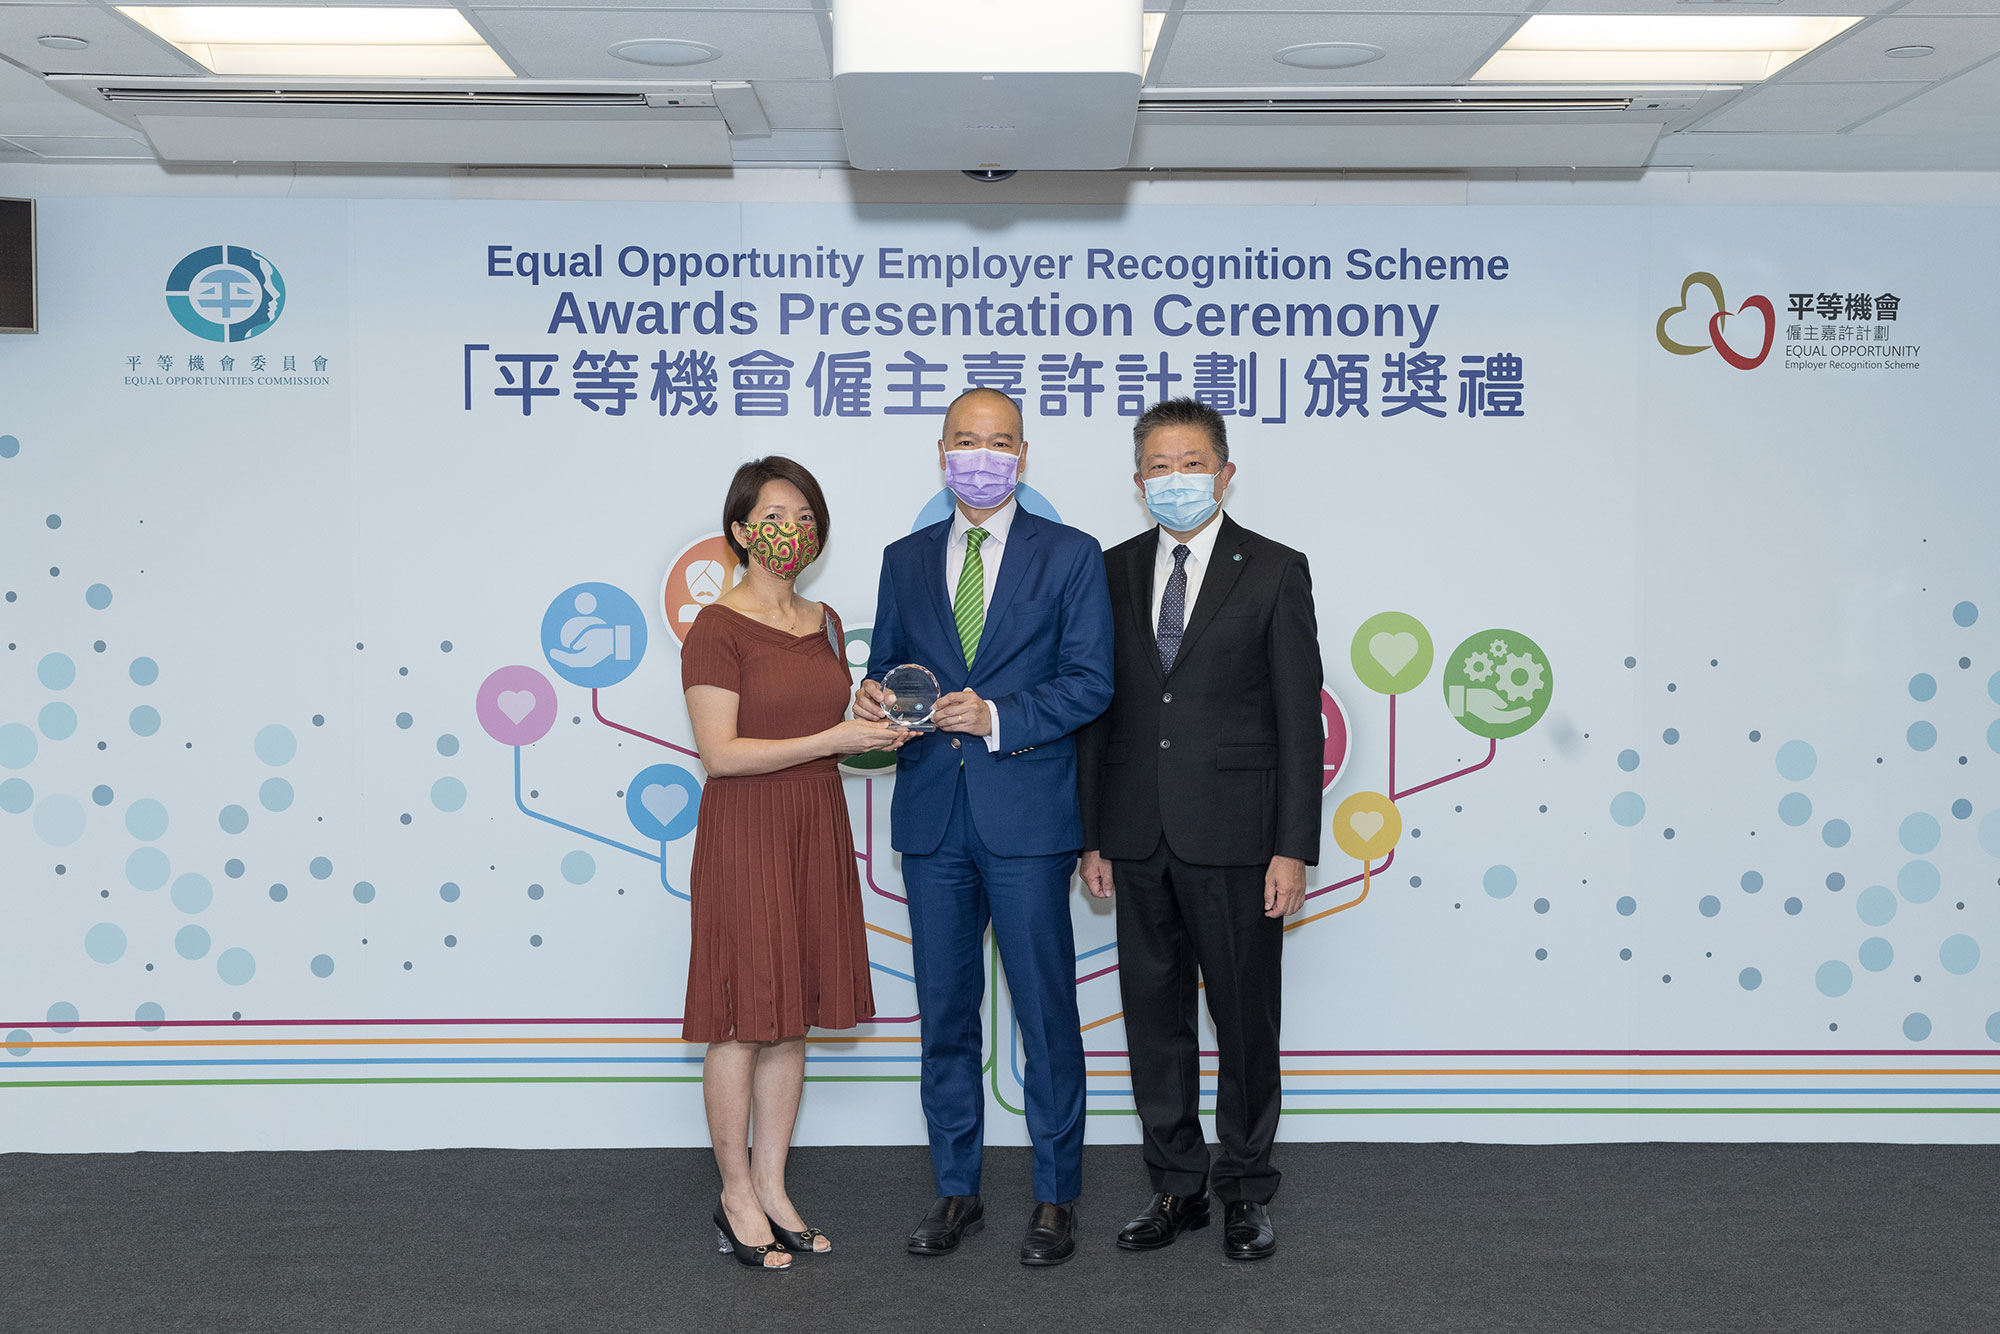 Mr Ricky CHU Man-kin, IDS, Chairperson of the Equal Opportunities Commission (right) and Prof Susanne CHOI, EOC Member and Former Convenor of the Policy, Research and Training Committee (left), present the trophy to the representative of Ultra Active Technology Limited (centre), winner of the Outstanding SME Award of the Equal Opportunity Employer Recognition Scheme. 